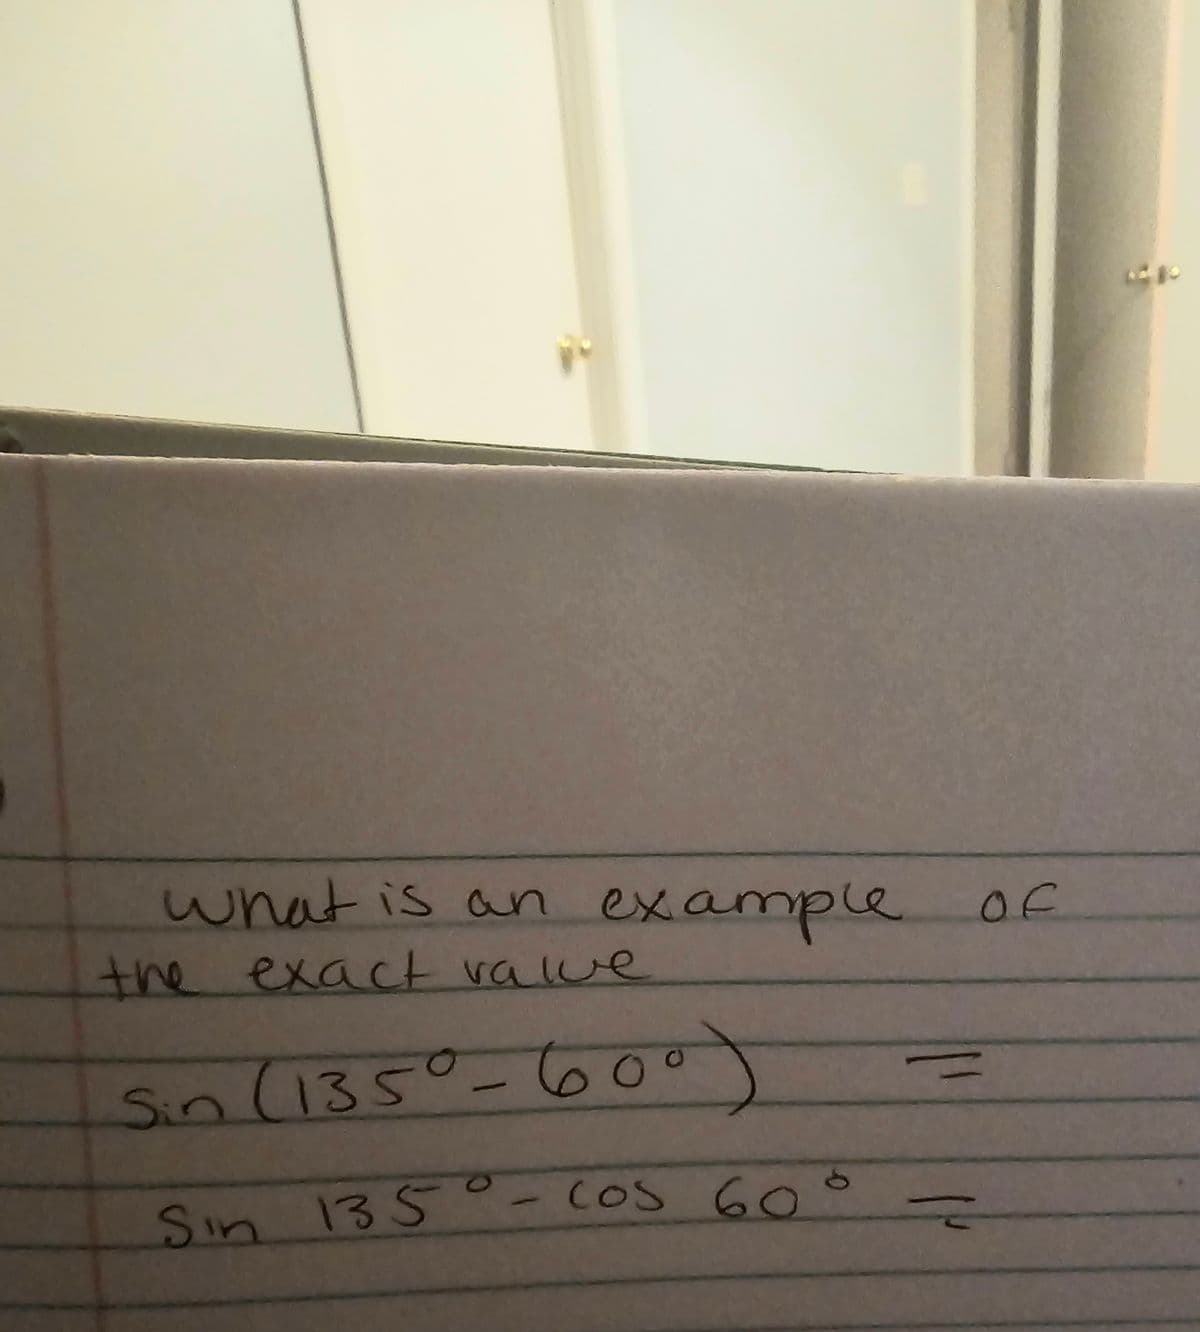 what is an example
the exact value
Sin (135° -60°)
Sin 135° - cos 60
of
F